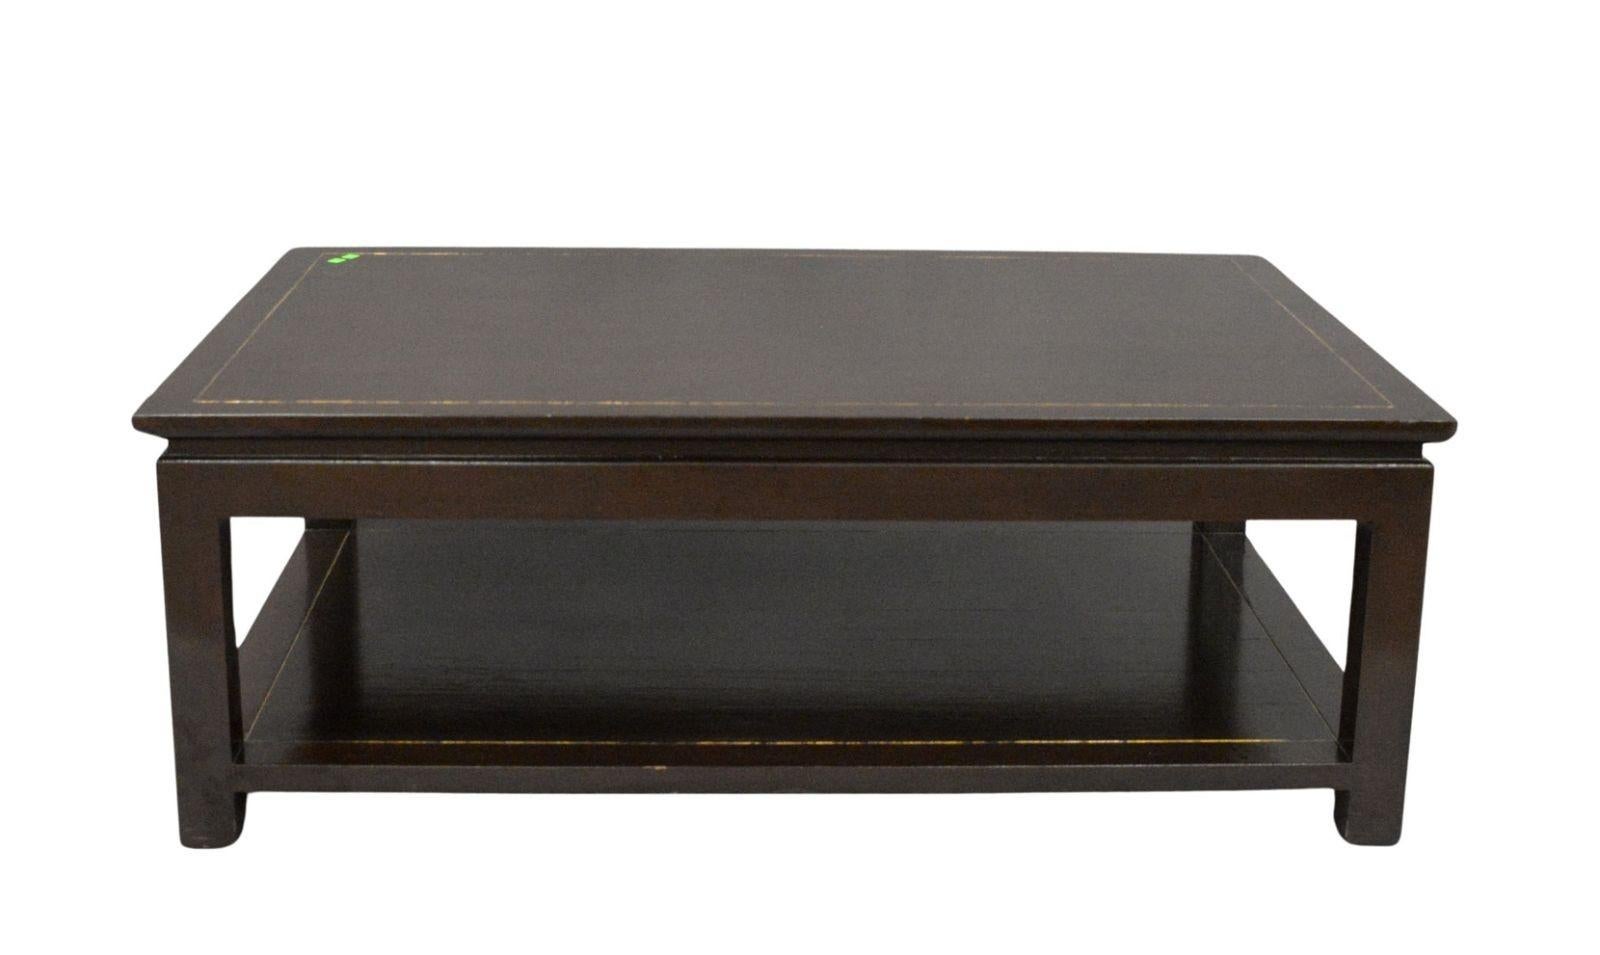 A dark chocolate two tier coffee table with gilt detail creating a two inch border for both the top and lower shelf.  The polished finish creates an elegant feel for the table, useful in multiple style rooms.